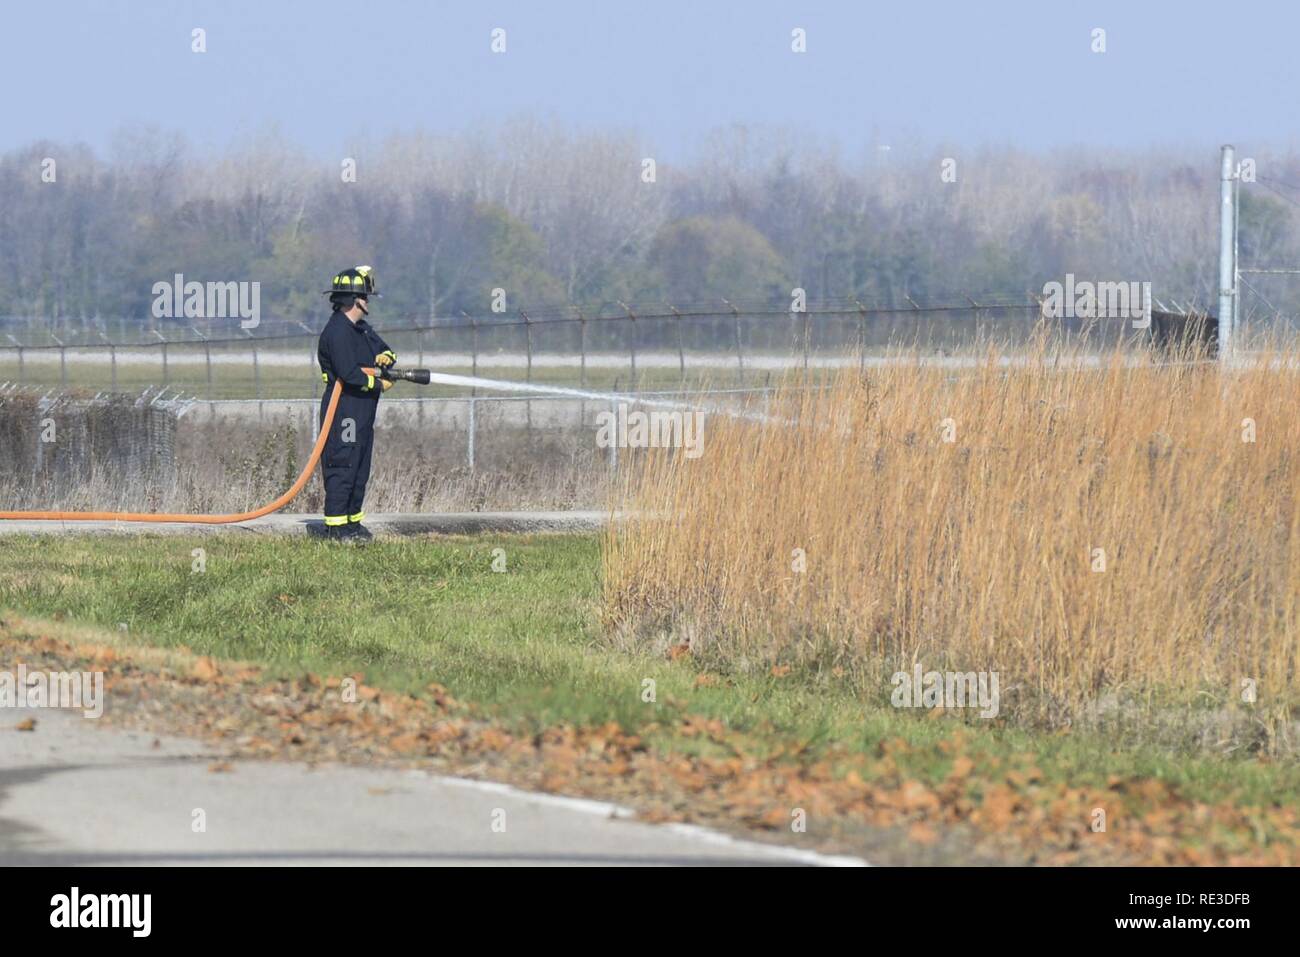 A firefighter from the 788th Civil Engineer Squadron hoses down the perimeter of a vegetation prior to the start of a controlled burn at Huffman Prairie, Wright-Patterson Air Force Base, Ohio, Nov 16, 2016. Controlled burns are needed to restore the prairie to its original character and rid it of non-native plant species. Stock Photo